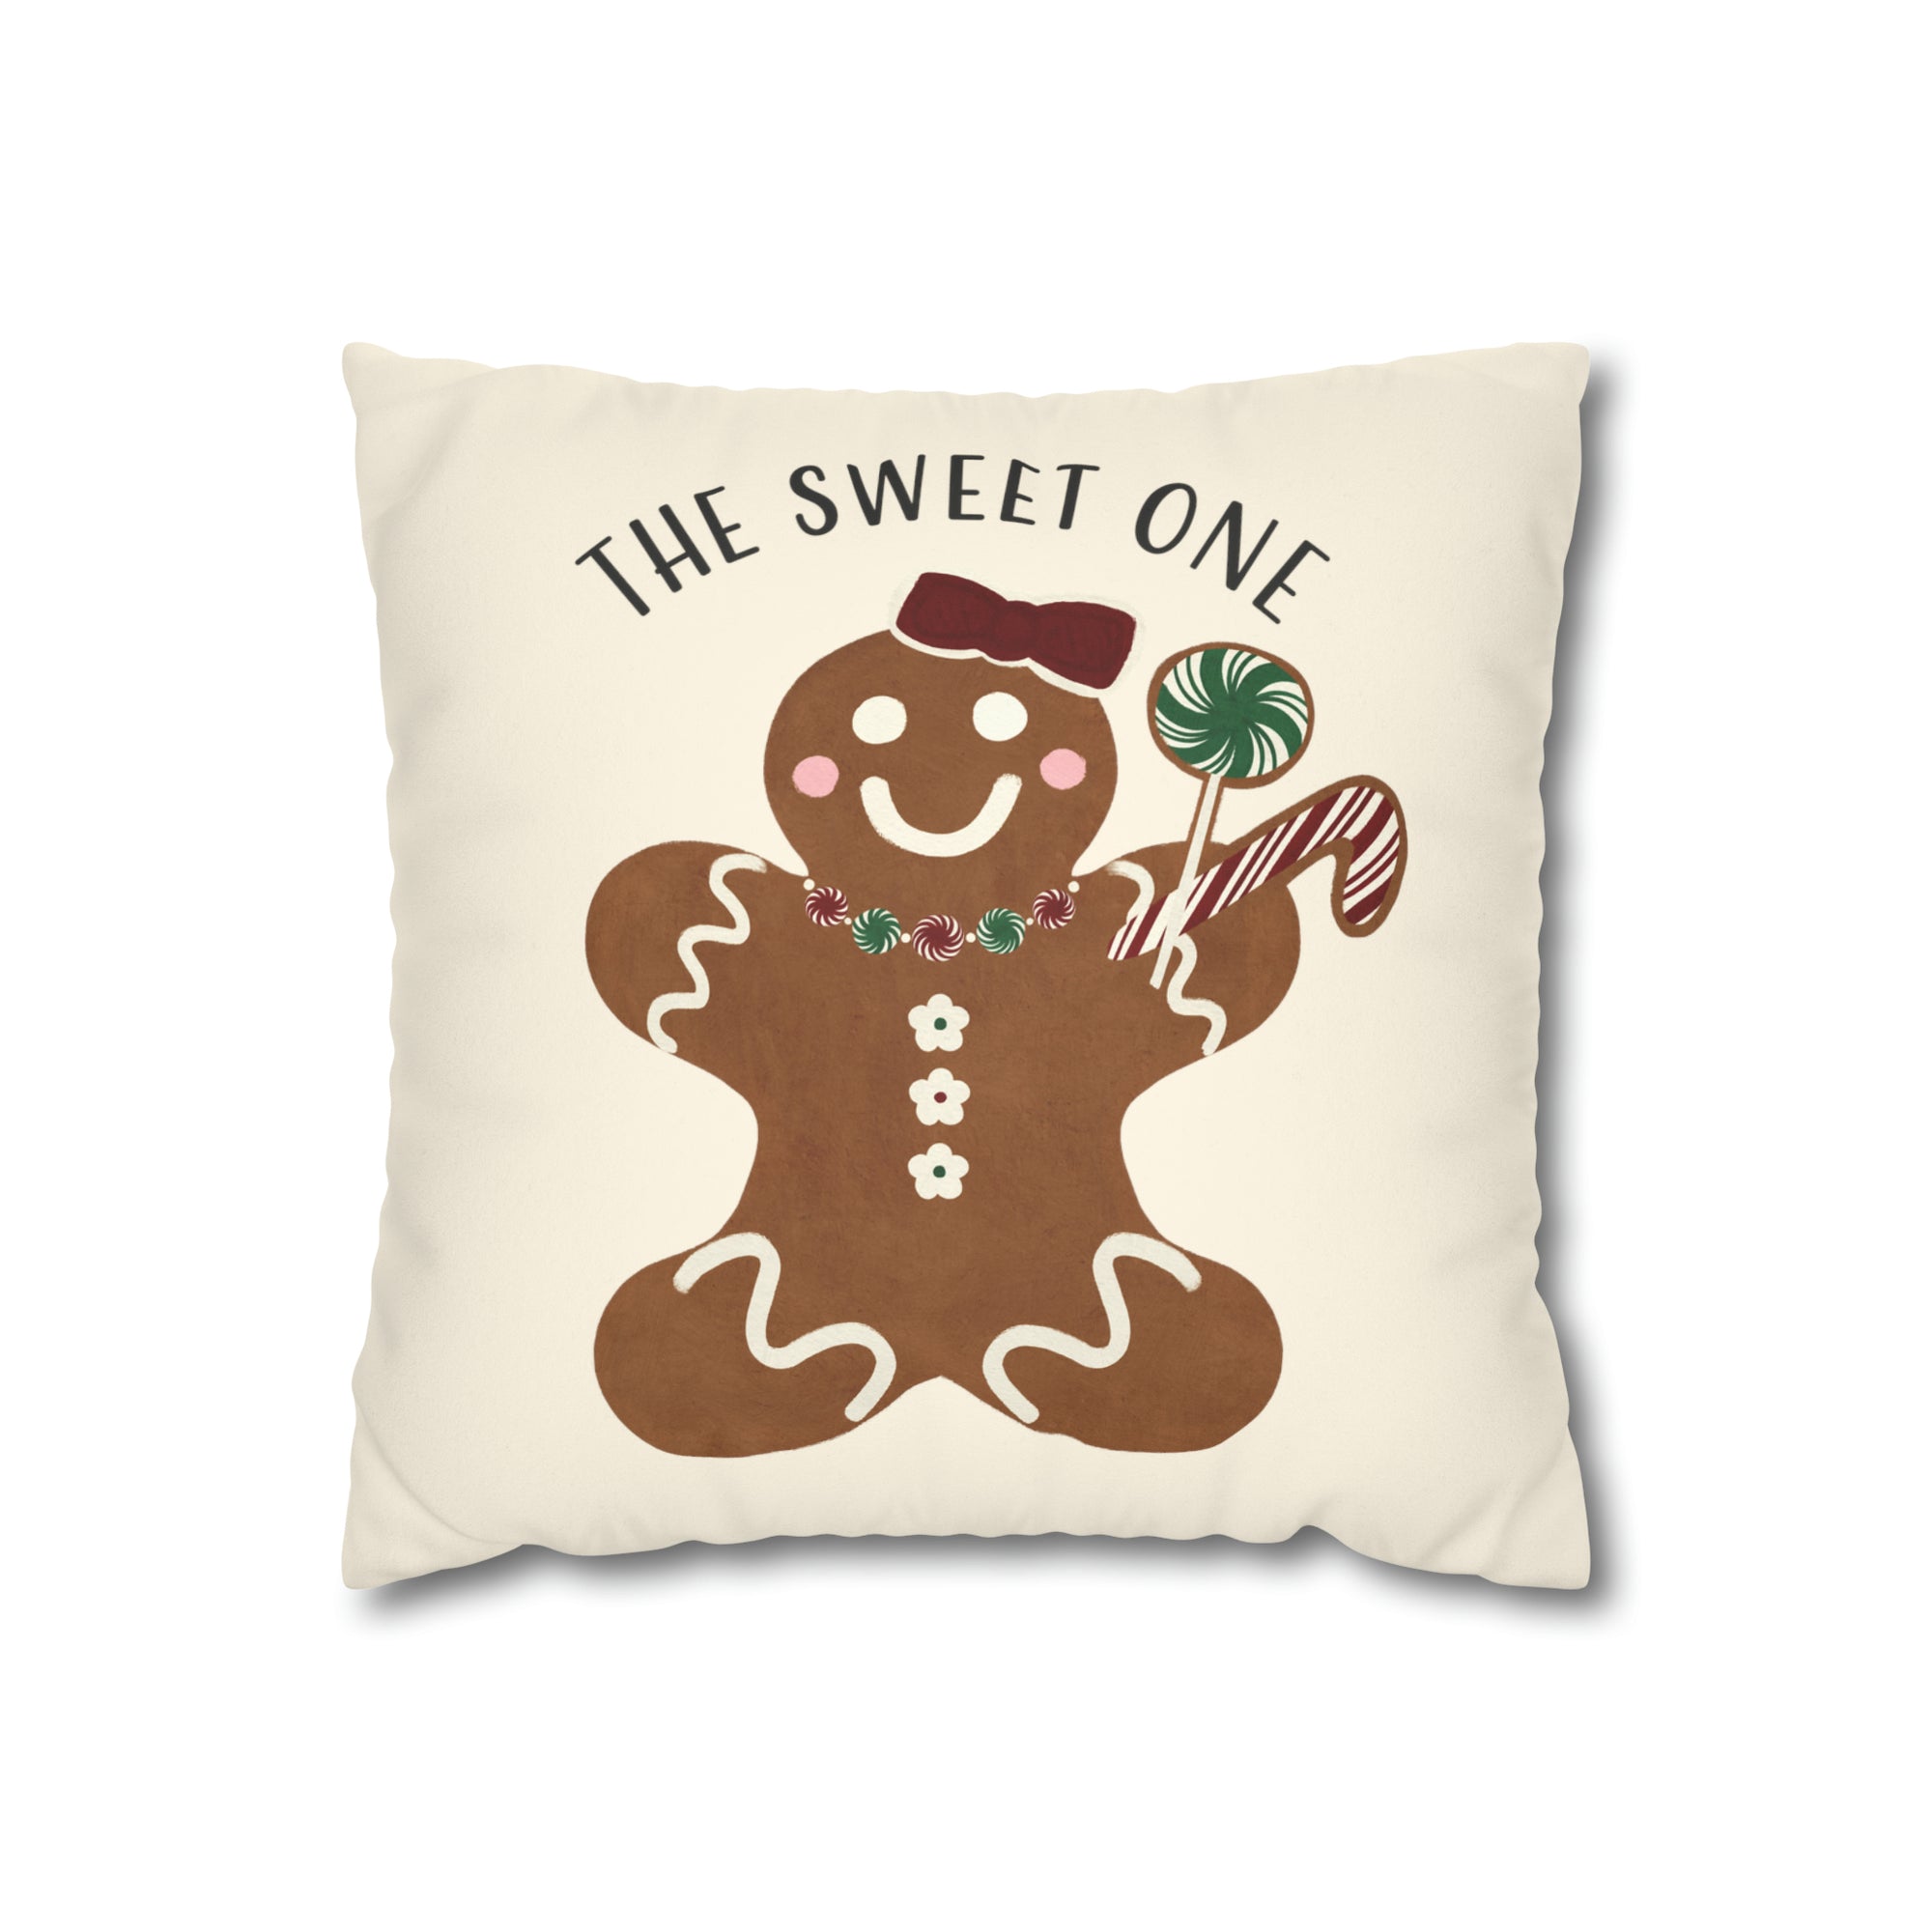 The Sweet One Gingerbread Girl Pillow+Cover or Cover Only